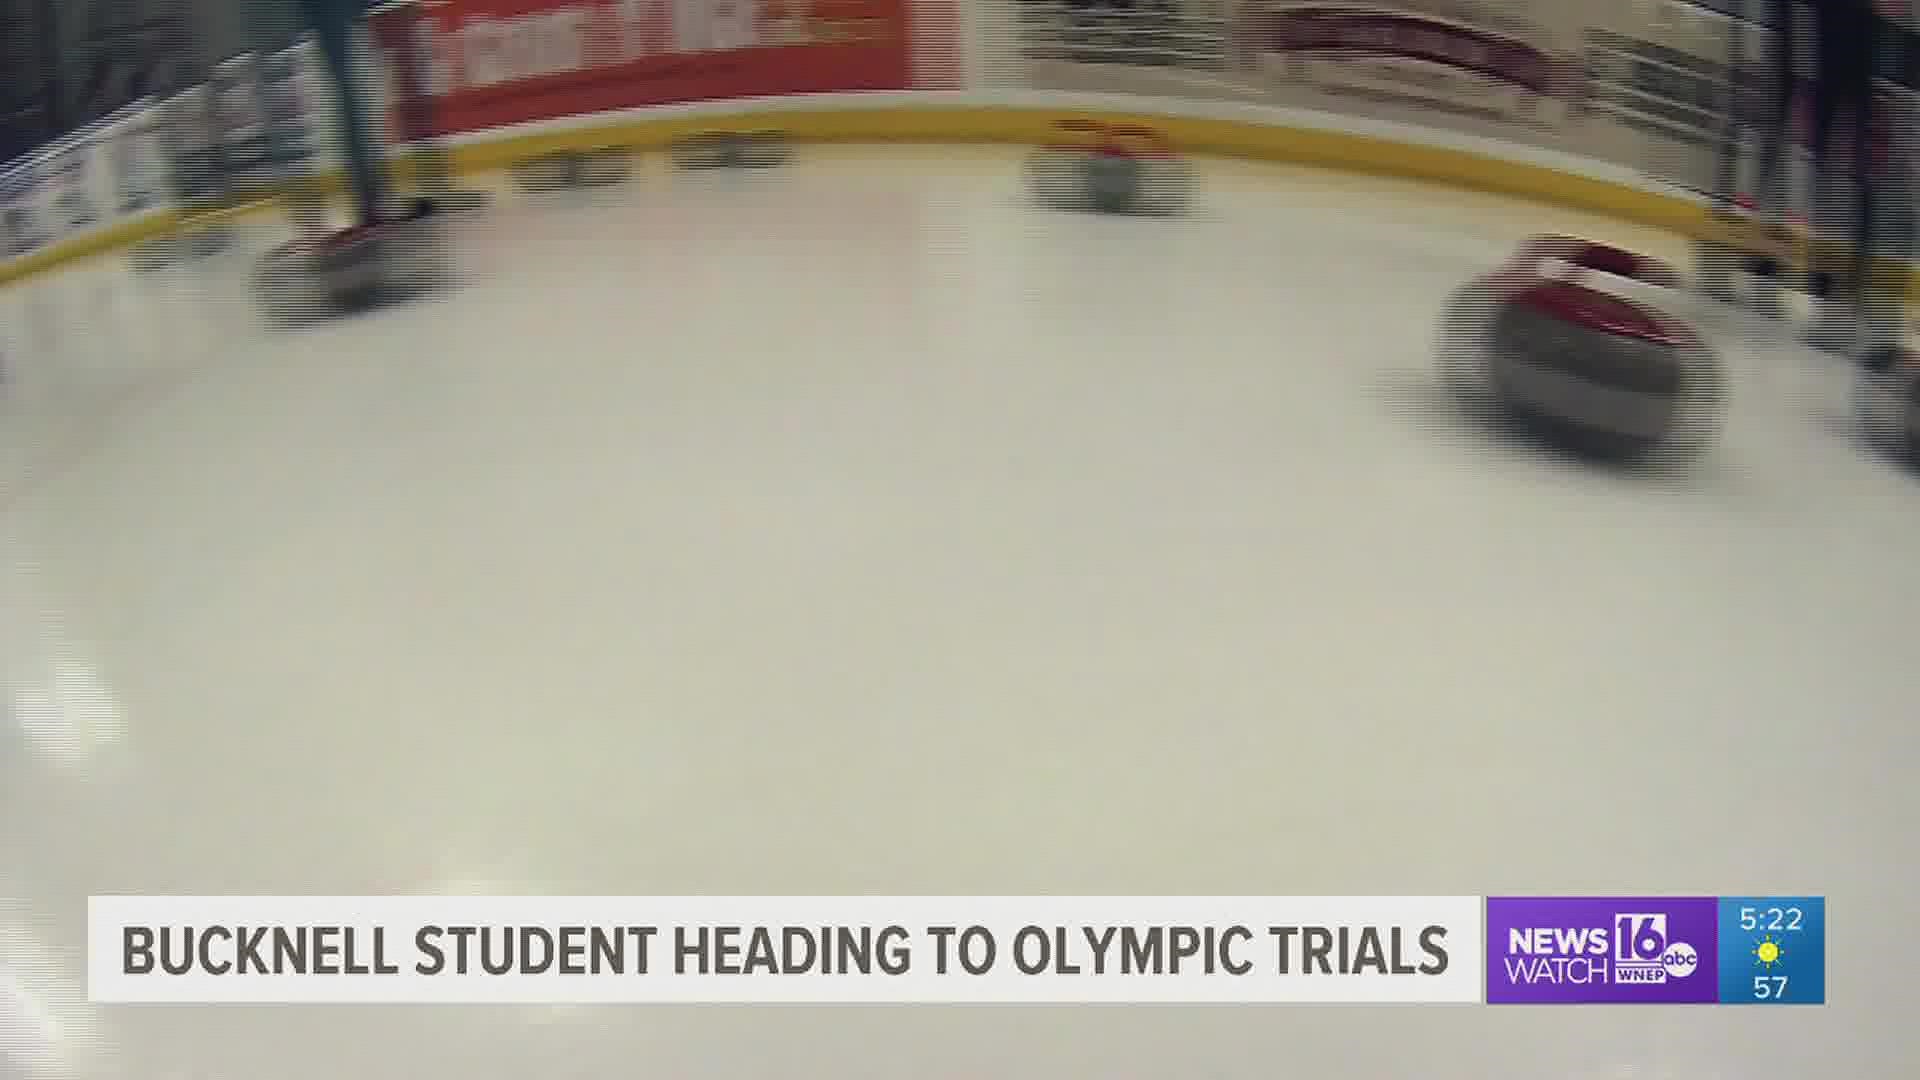 A Bucknell University student has winter on her mind. She will participate in this weekend's U.S. Olympic team trials for curling.